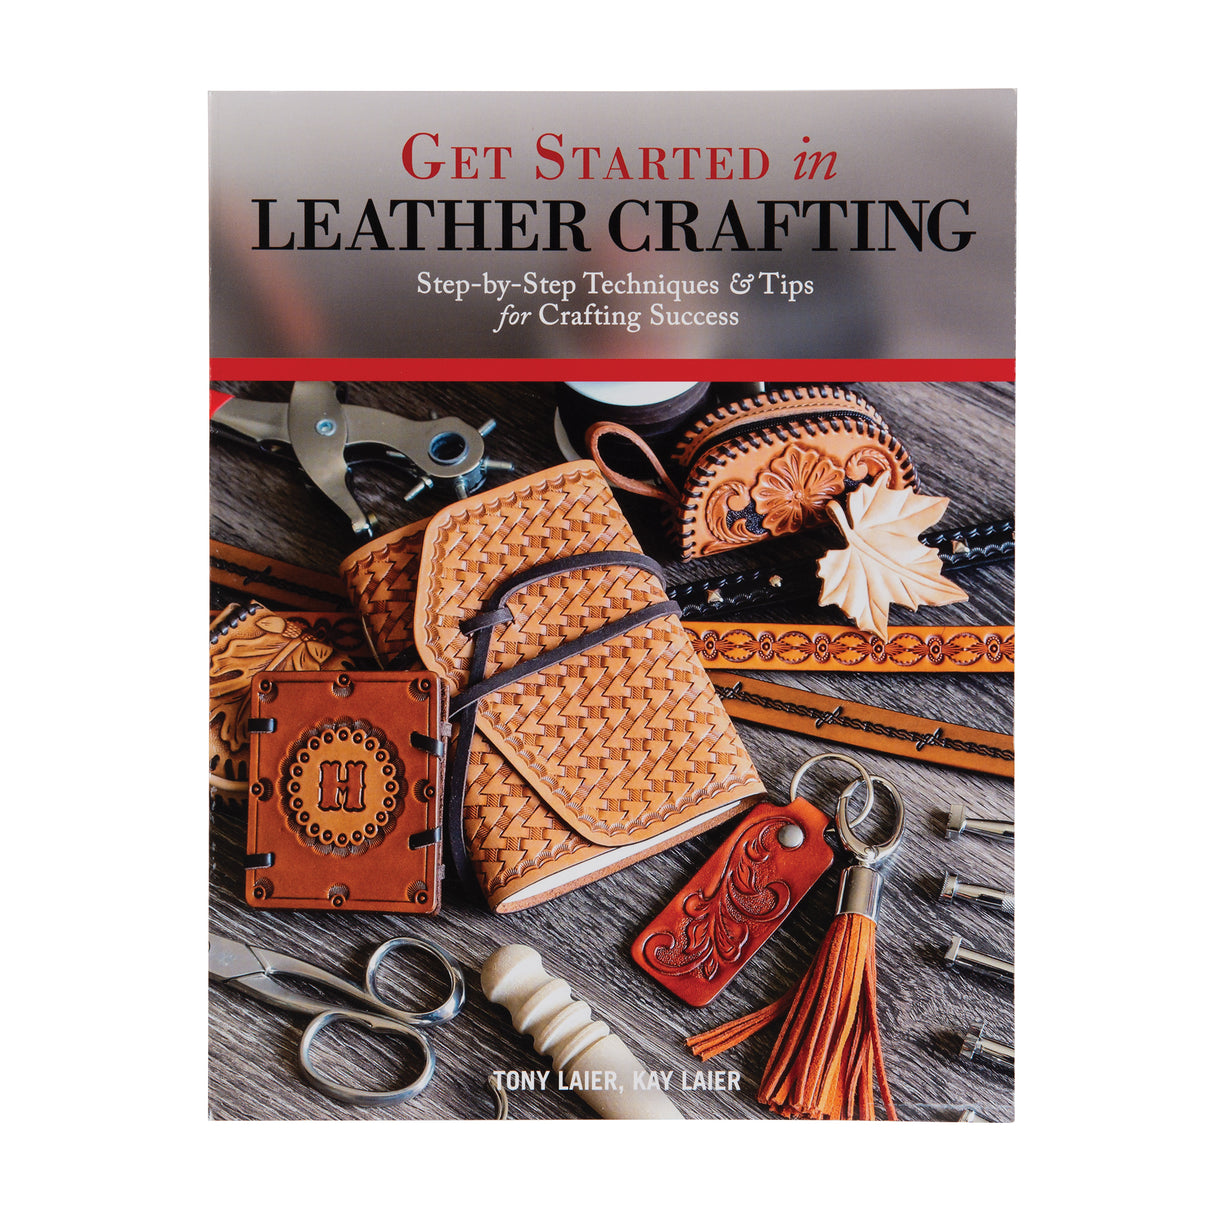 Get Started in Leather Crafting Book